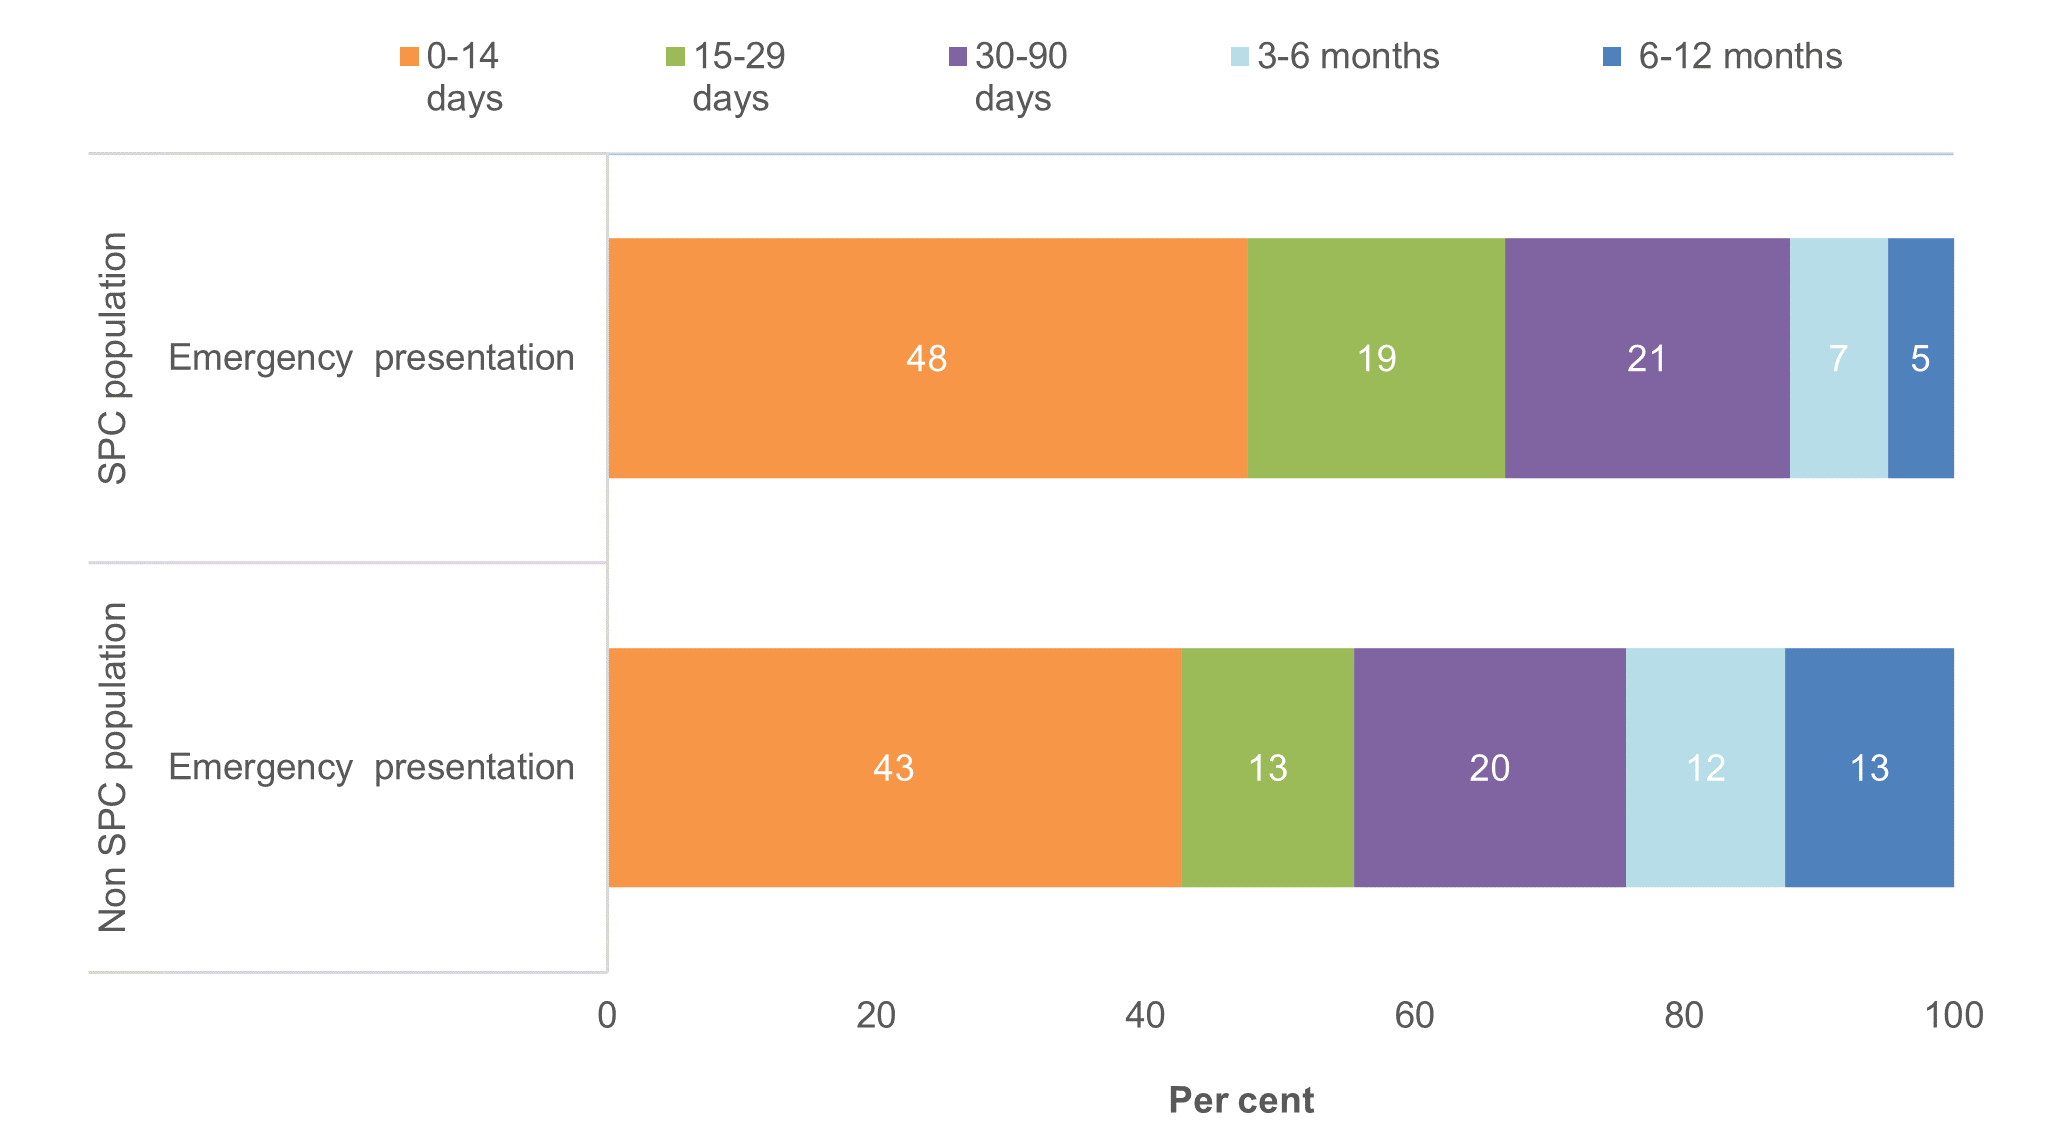 This figure shows the distribution of the number of days from last presentation to Emergency Department to death in the last year of life, for SPC and non-SPC populations.